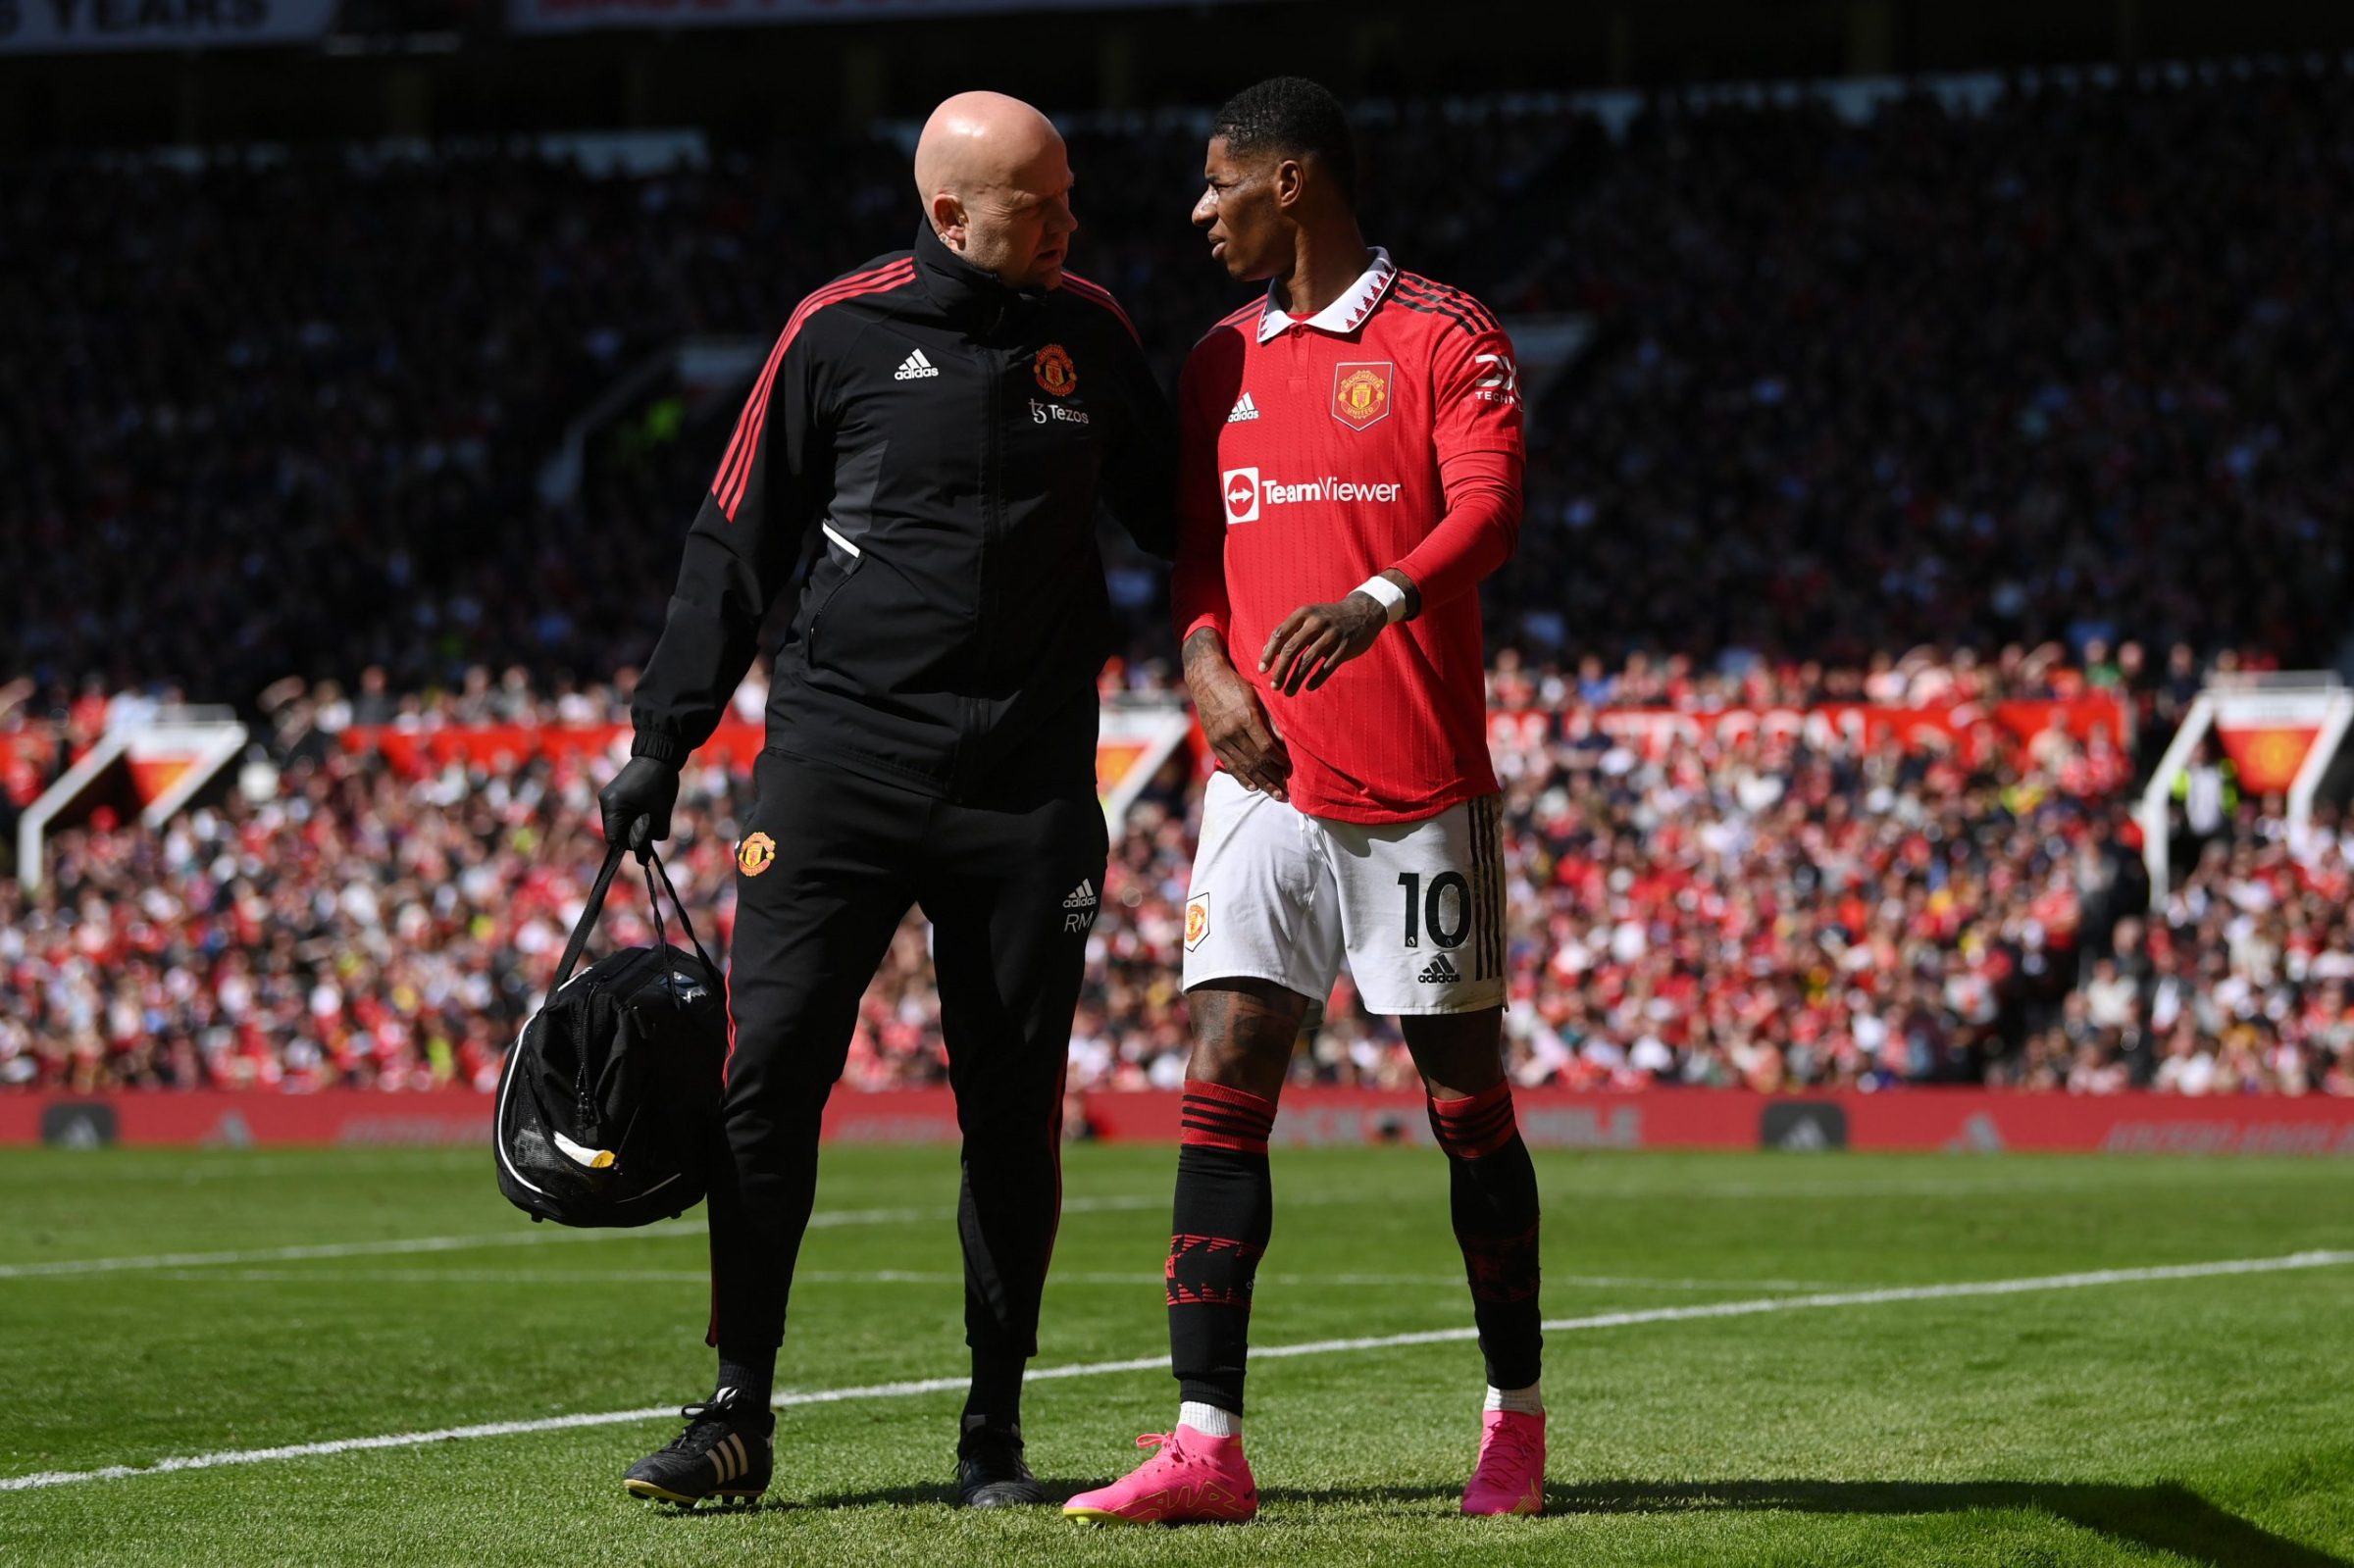 United sweep » Rashford likely to miss games / Garnacho’s condition / No EC at Old Trafford |  Muss.se |  Manchester United Supporters Club Scandinavia